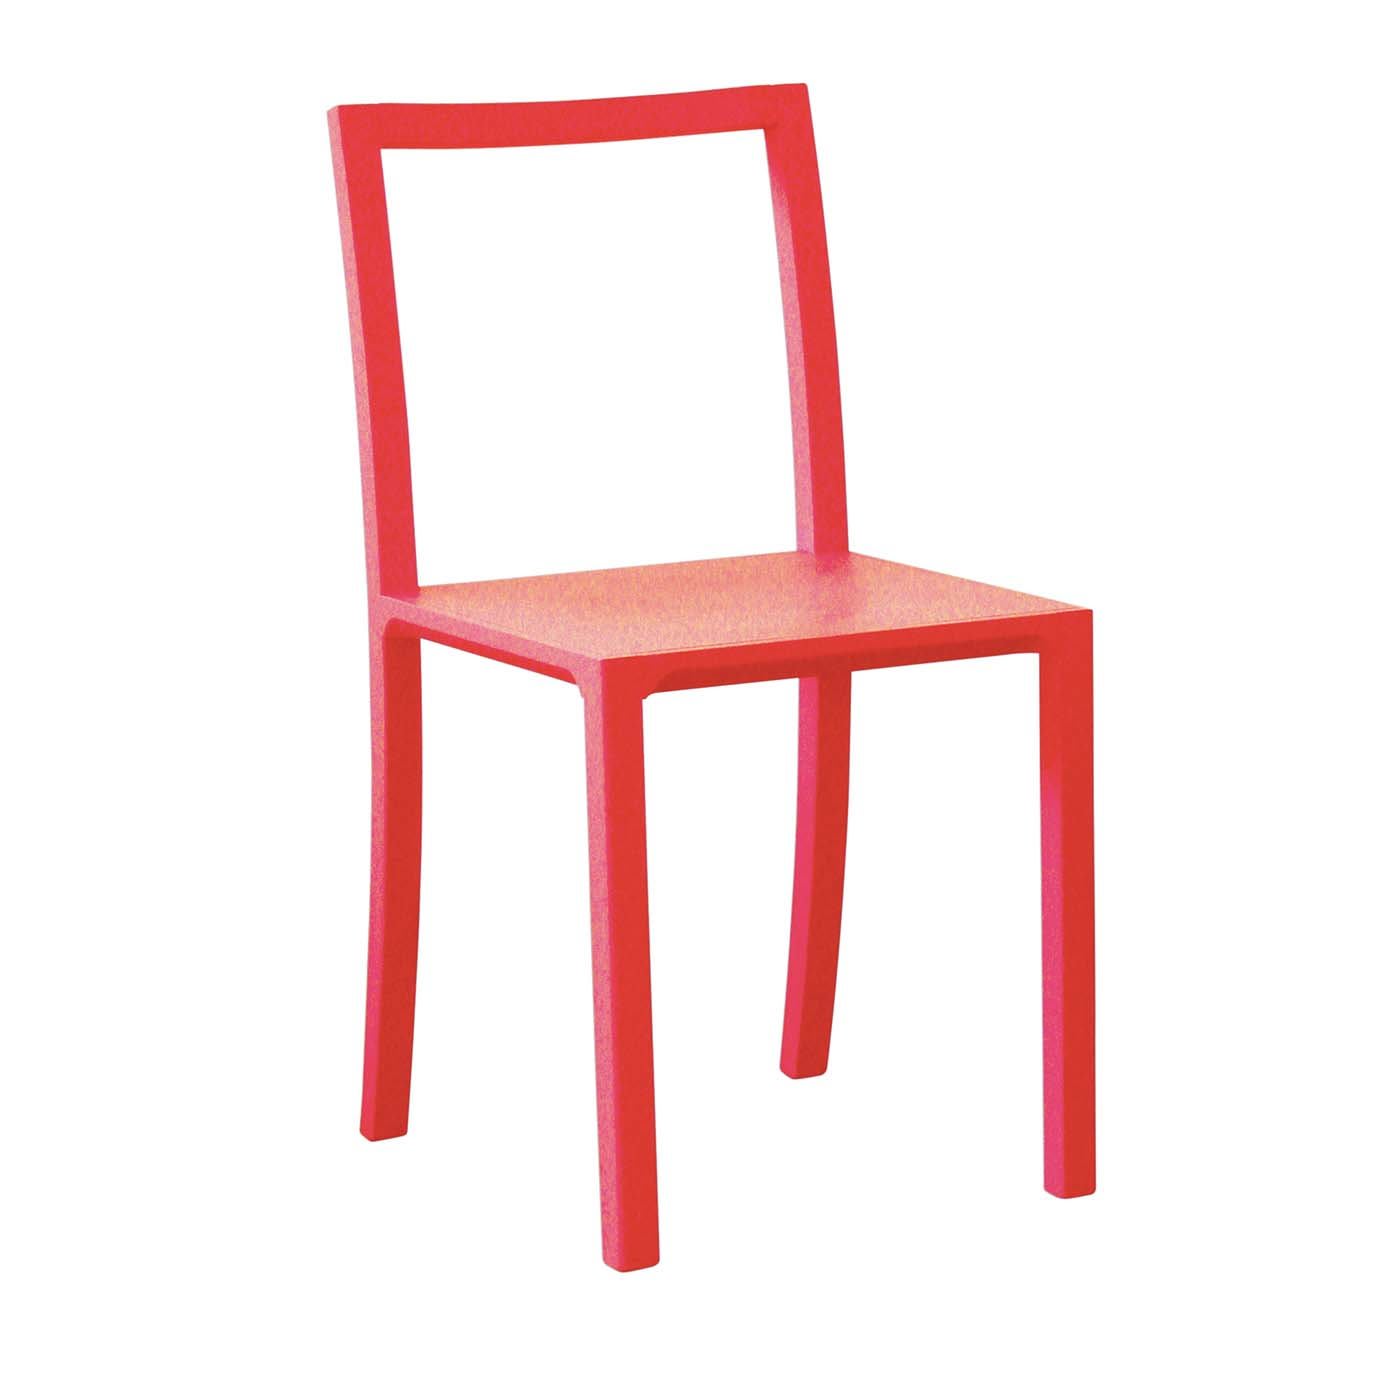 Framework Set of 2 Red Brick Chairs by Steffen Kehrle - L'Abbate